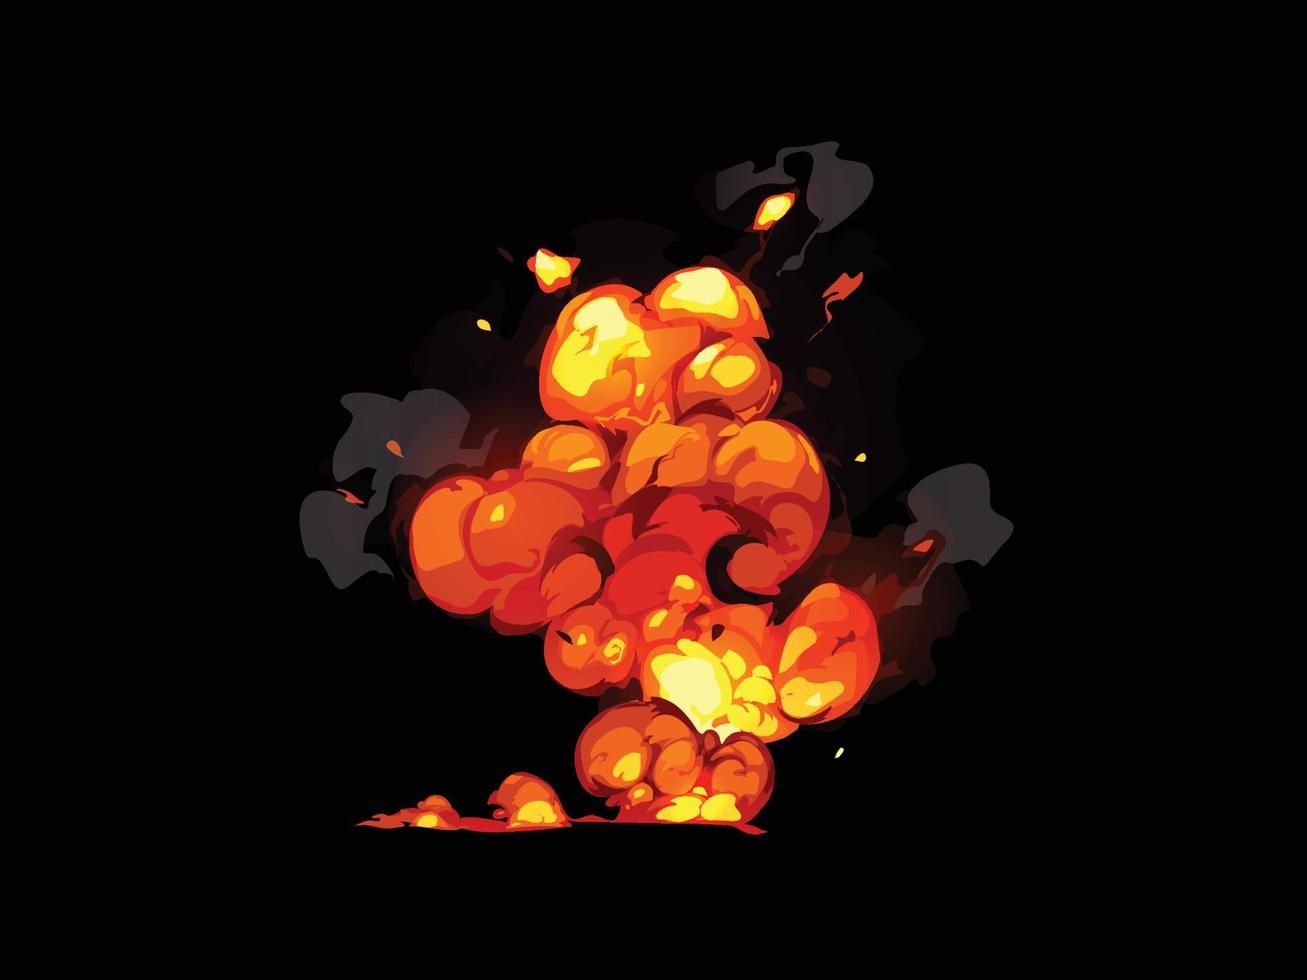 Cartoon dynamite or bomb explosion, fire. Booming cloud and smoke elements vector